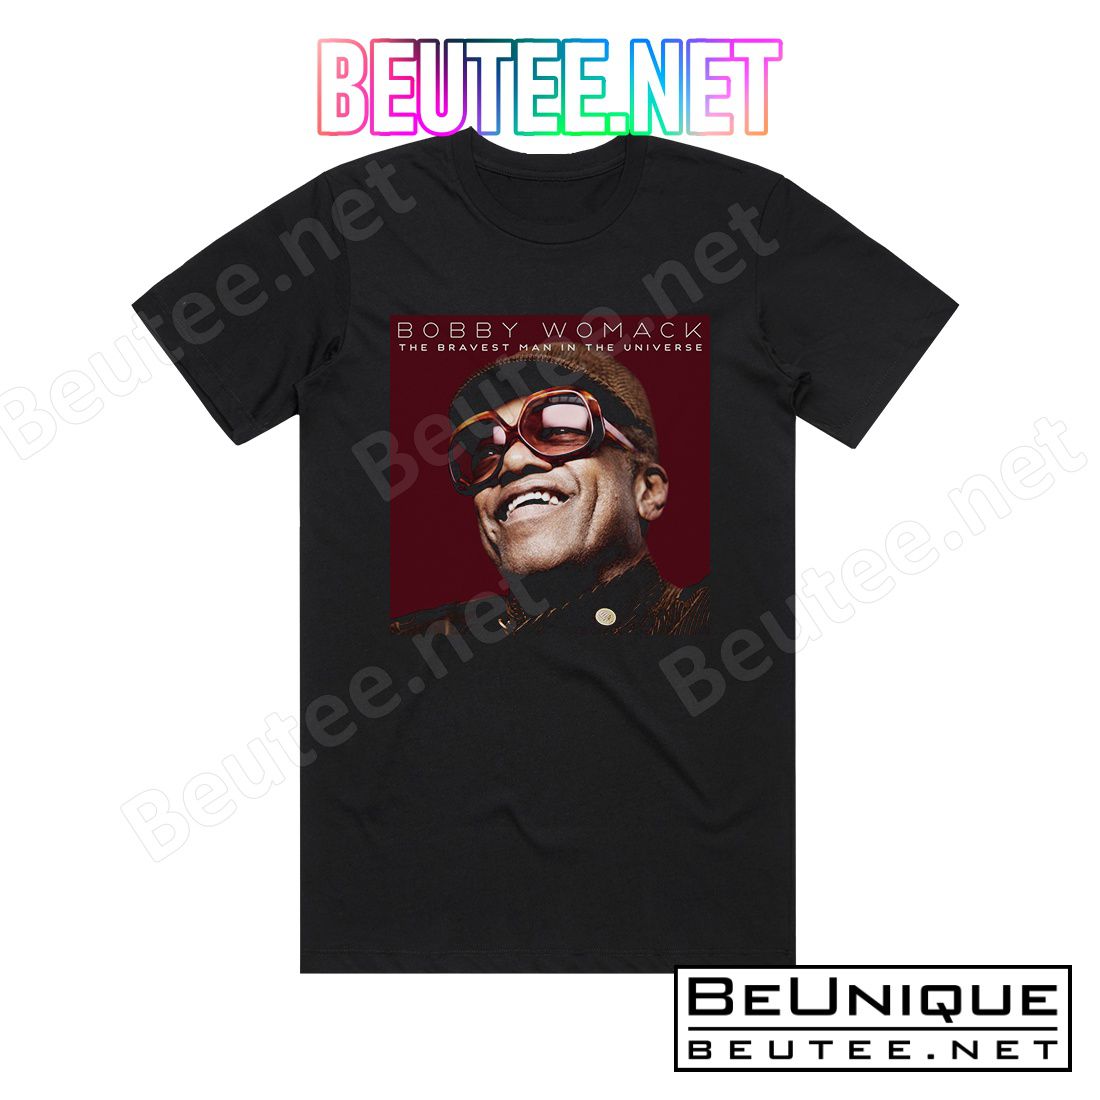 Bobby Womack The Bravest Man In The Universe 1 Album Cover T-Shirt